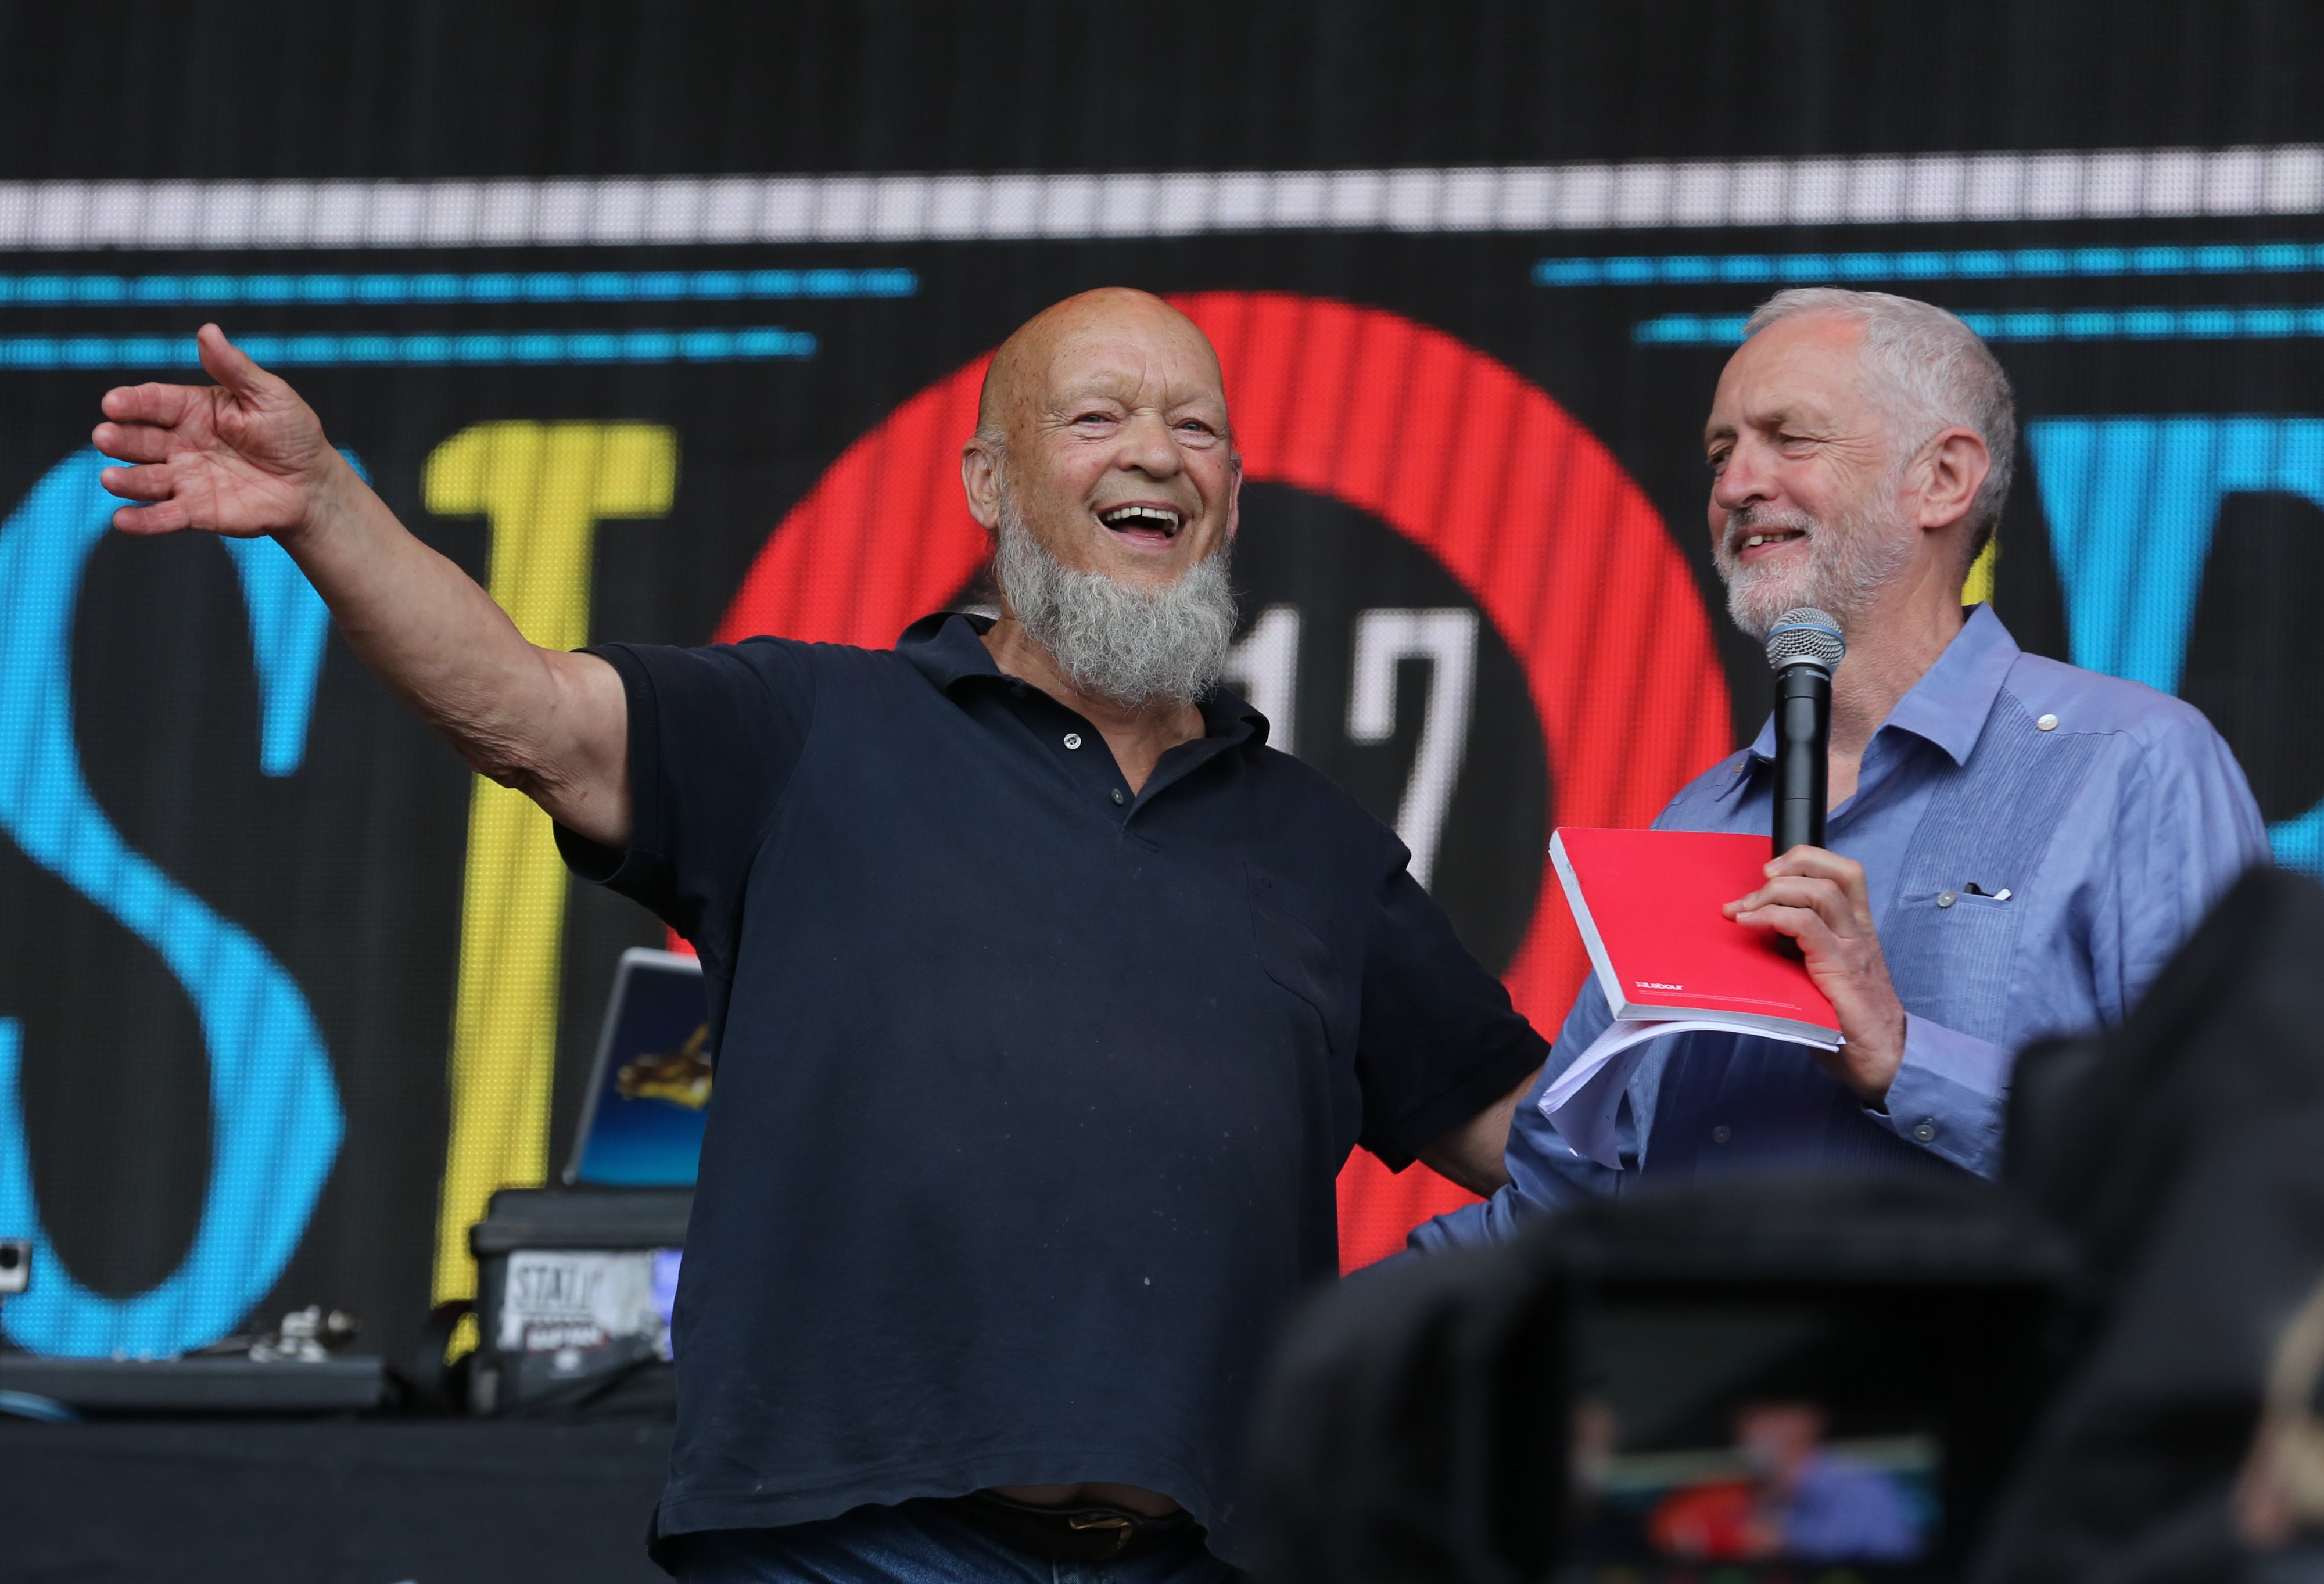 Glastonbury founder Michael Eavis (left) and Jeremy Corbyn on stage at the 2017 festival